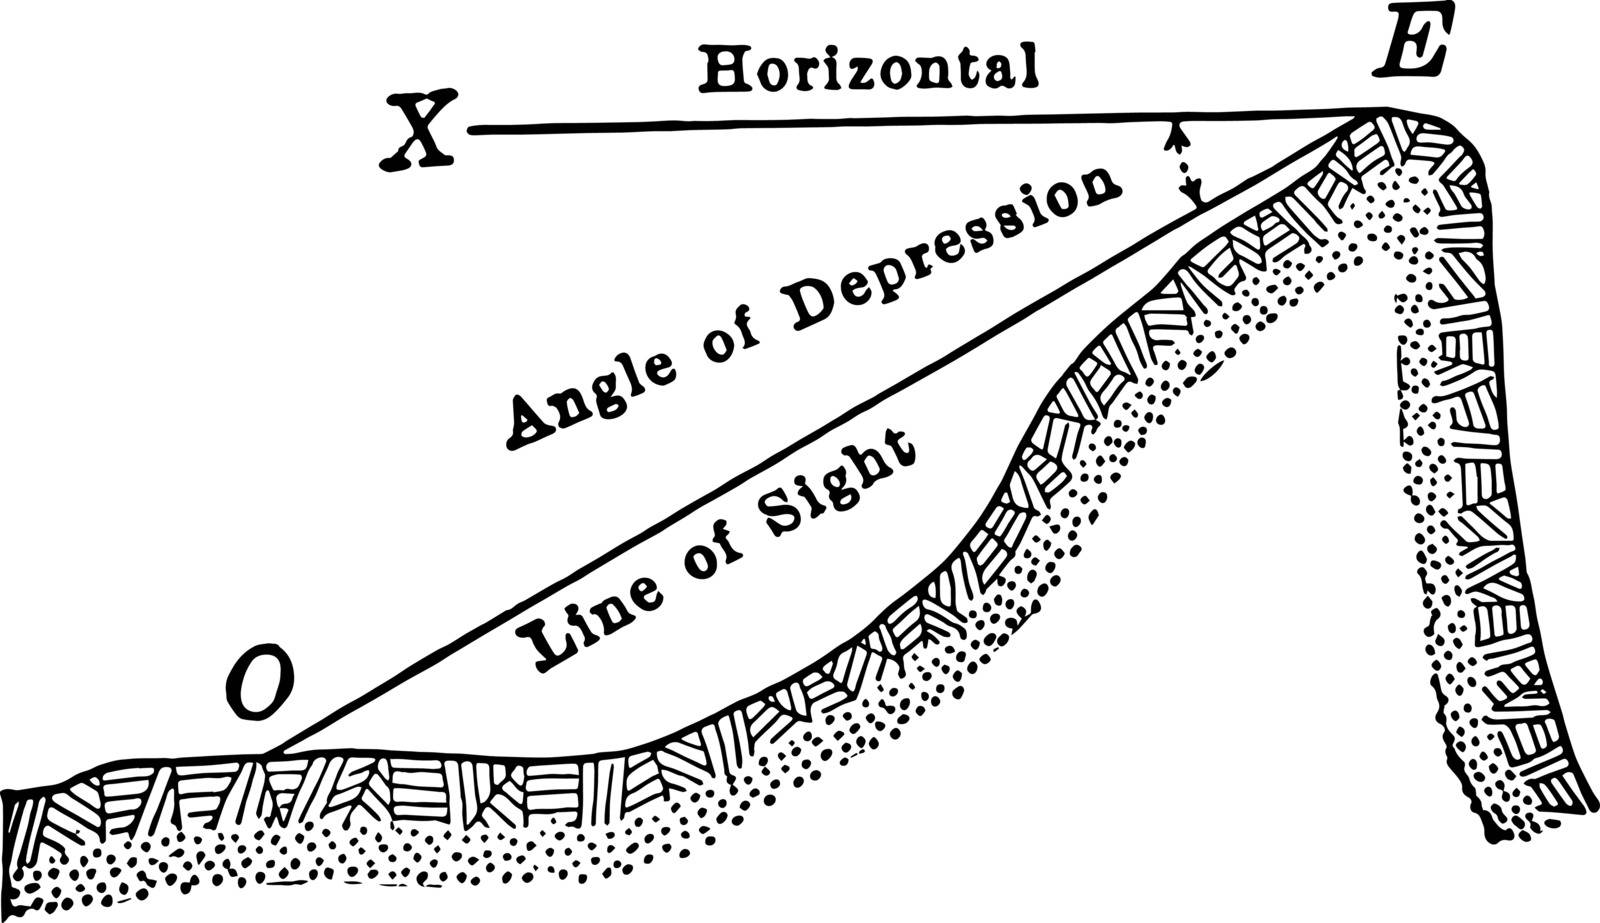 An image showing the angle of depression. The horizontal line drawn XE and the line OE create this line of two angles of depression, vintage line drawing or engraving illustration.